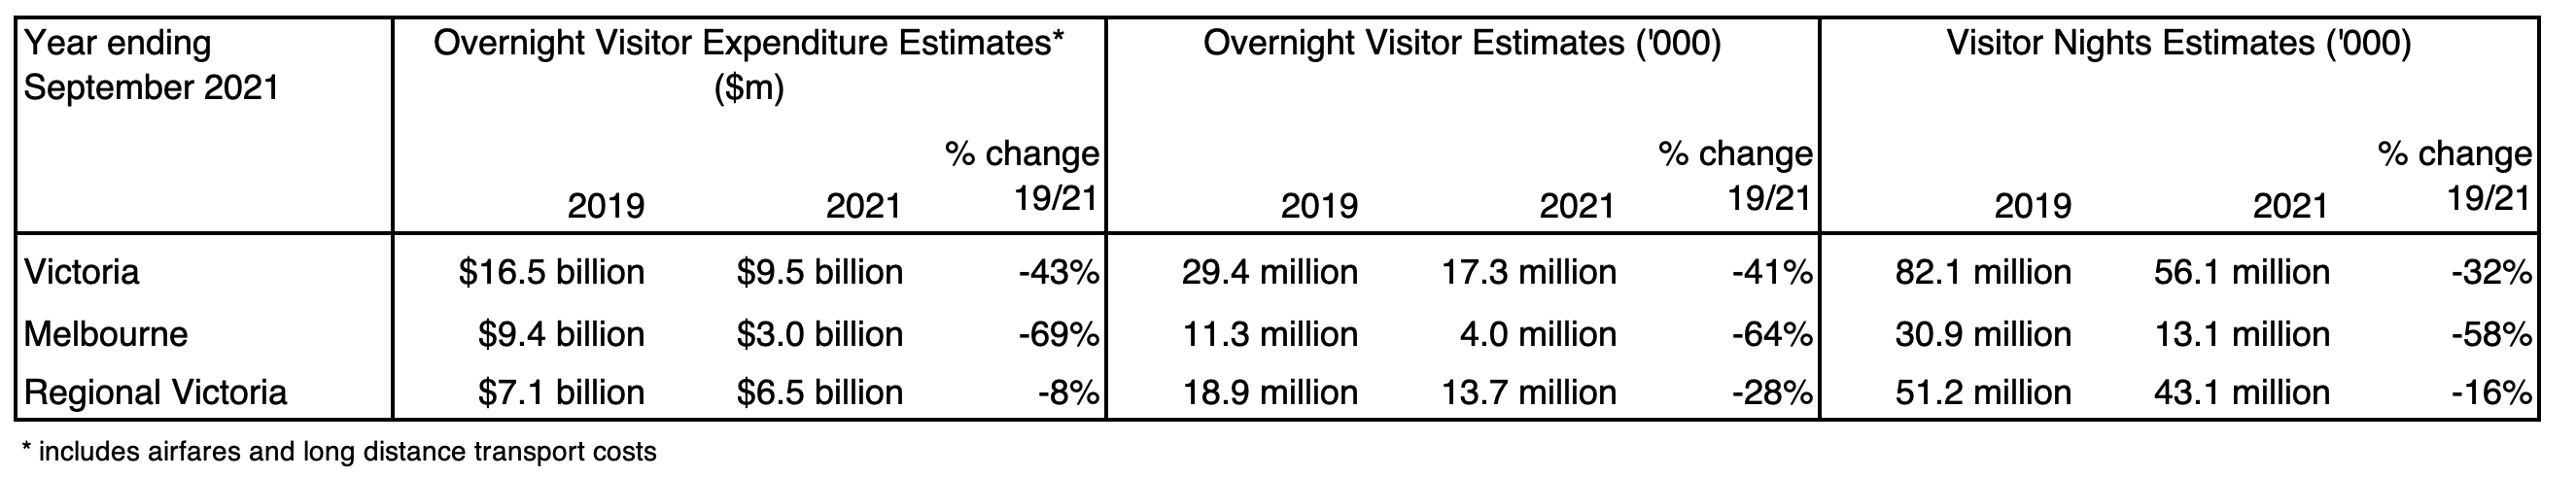 Table Title - Victorian Domestic Overnight Visitor Summary Table, Year ending September 2021. Column one title is Visitor Expenditure Estimates (includes airfares and long-distance transport costs). Victoria: $16.5 billion in 2019, $9.5 billion in 2021, down 43 per cent. Melbourne: $9.4 billion in 2019, $3.0 billion in 2021, down 69 per cent. Regional Victoria: $7.1 billion in 2019, $6.5 billion in 2021, down 8 per cent. Column two title is Overnight Visitor Estimates. Victoria: 29.4 million in 2019, 17.3 million in 2021, down 41 per cent. Melbourne: 11.3 million in 2019, 4.0 million in 2021, down 64 per cent. Regional Victoria: 18.9 million in 2019, 13.7 million in 2021, down 28 per cent. Column three title is Visitor Nights Estimates. Victoria: 82.1 million in 2019, 56.1 million in 2021, down 32 per cent. Melbourne: 30.9 million in 2019, 13.1 million in 2021, down 58 per cent. Regional Victoria: 51.2 million in 2019, 43.1 million in 2021, down 16 per cent.